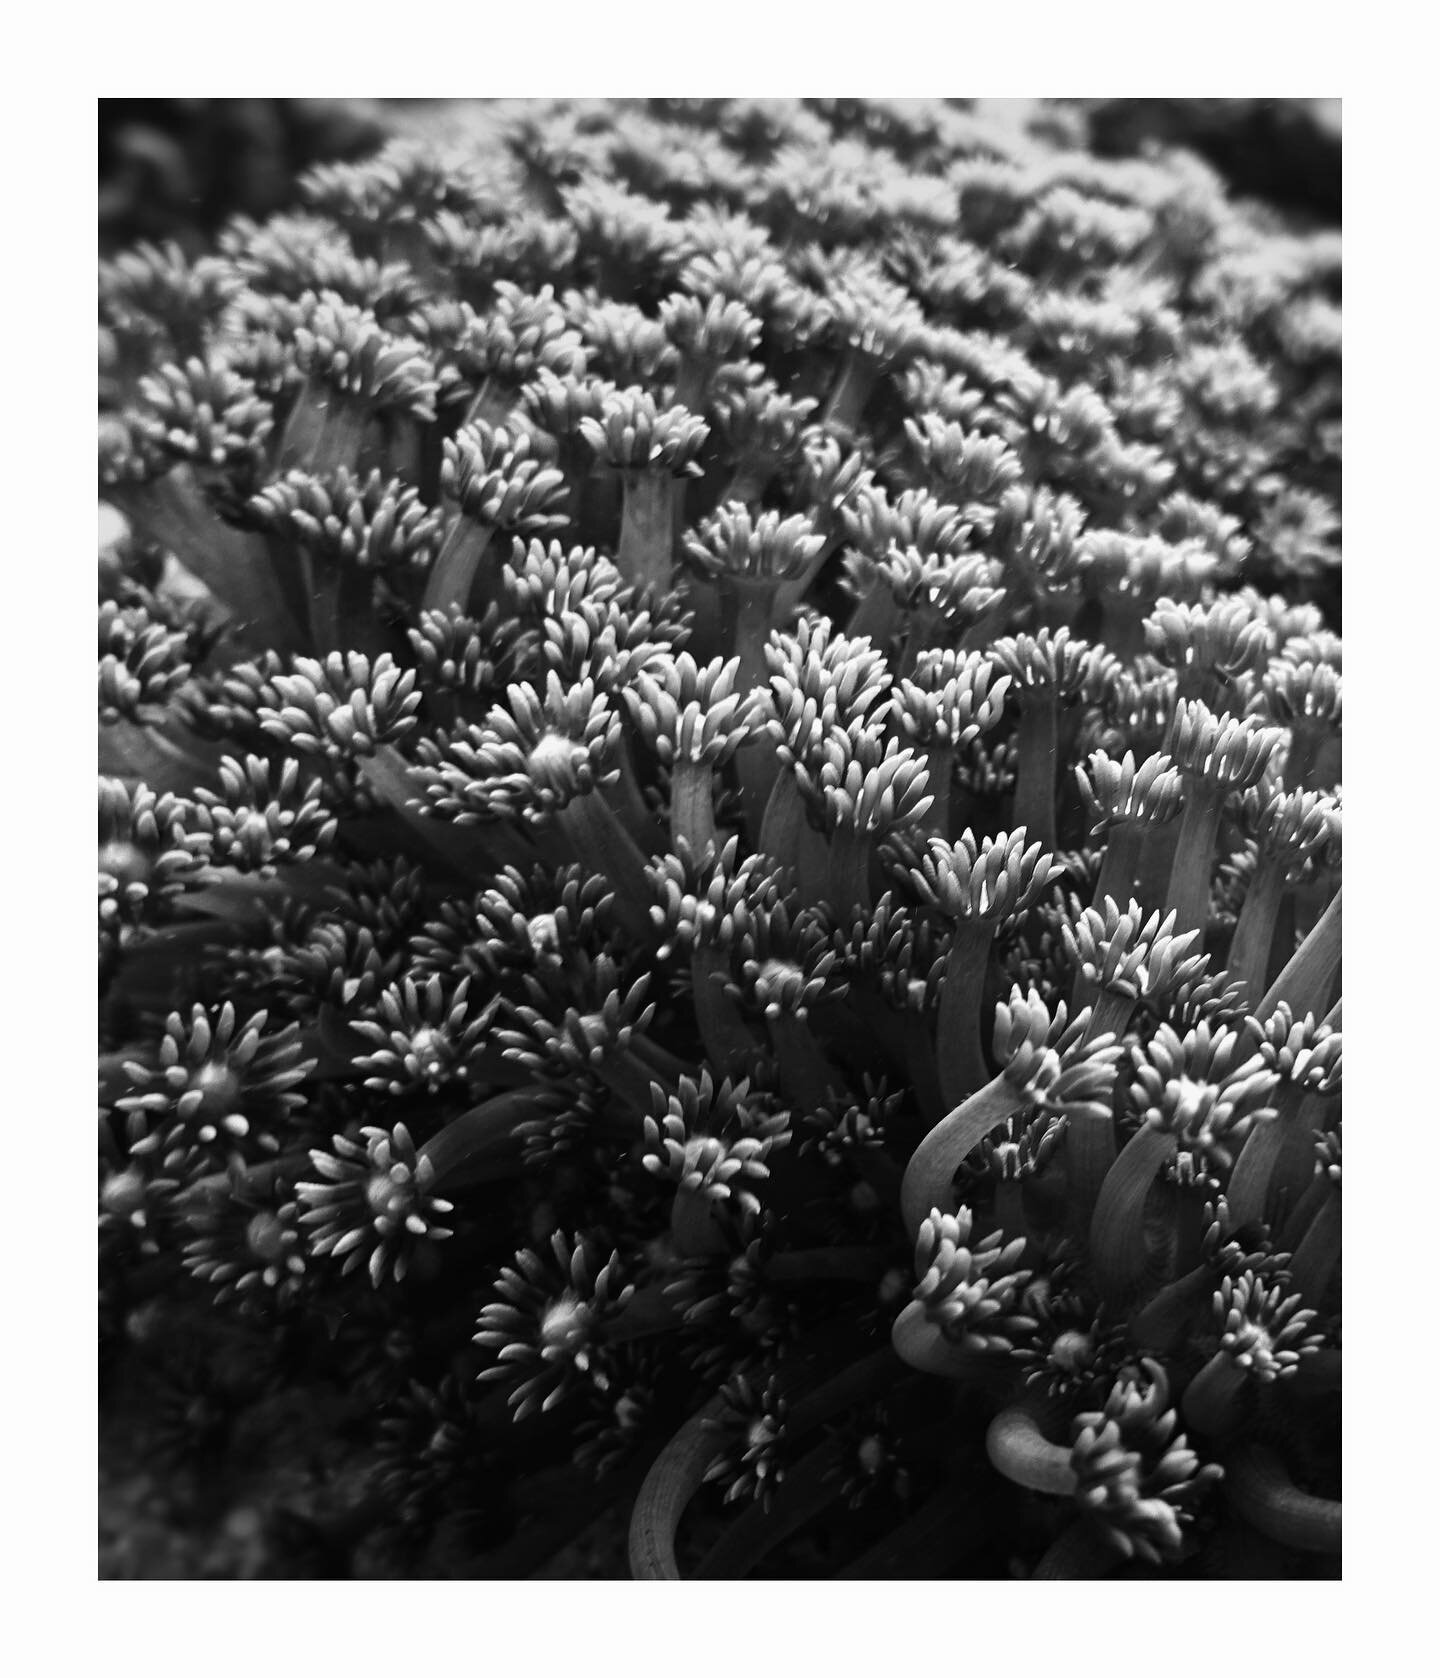 // These are not flowers 🌼

Keep scrolling these are not flowers, these are soft corals. We have intentionally added 3 versions, A is black &amp; white, B is color corrected for a custom warm tone, C is the original picture. 

This picture was taken